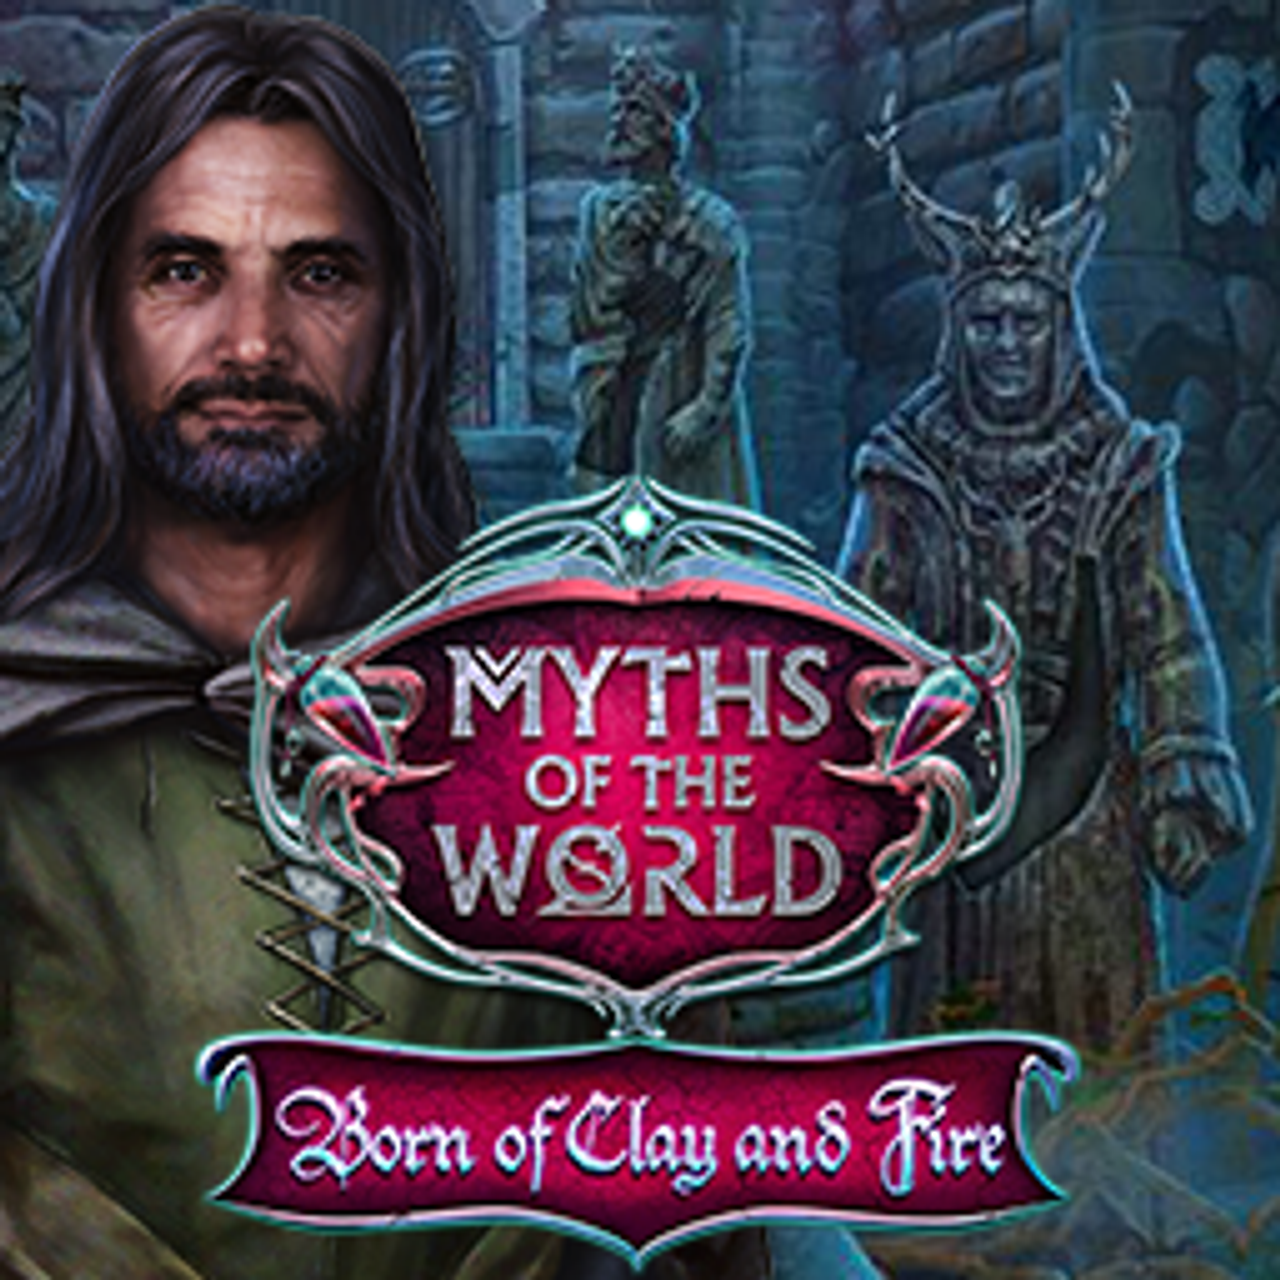 Myths of the World: Born of Clay and Fire